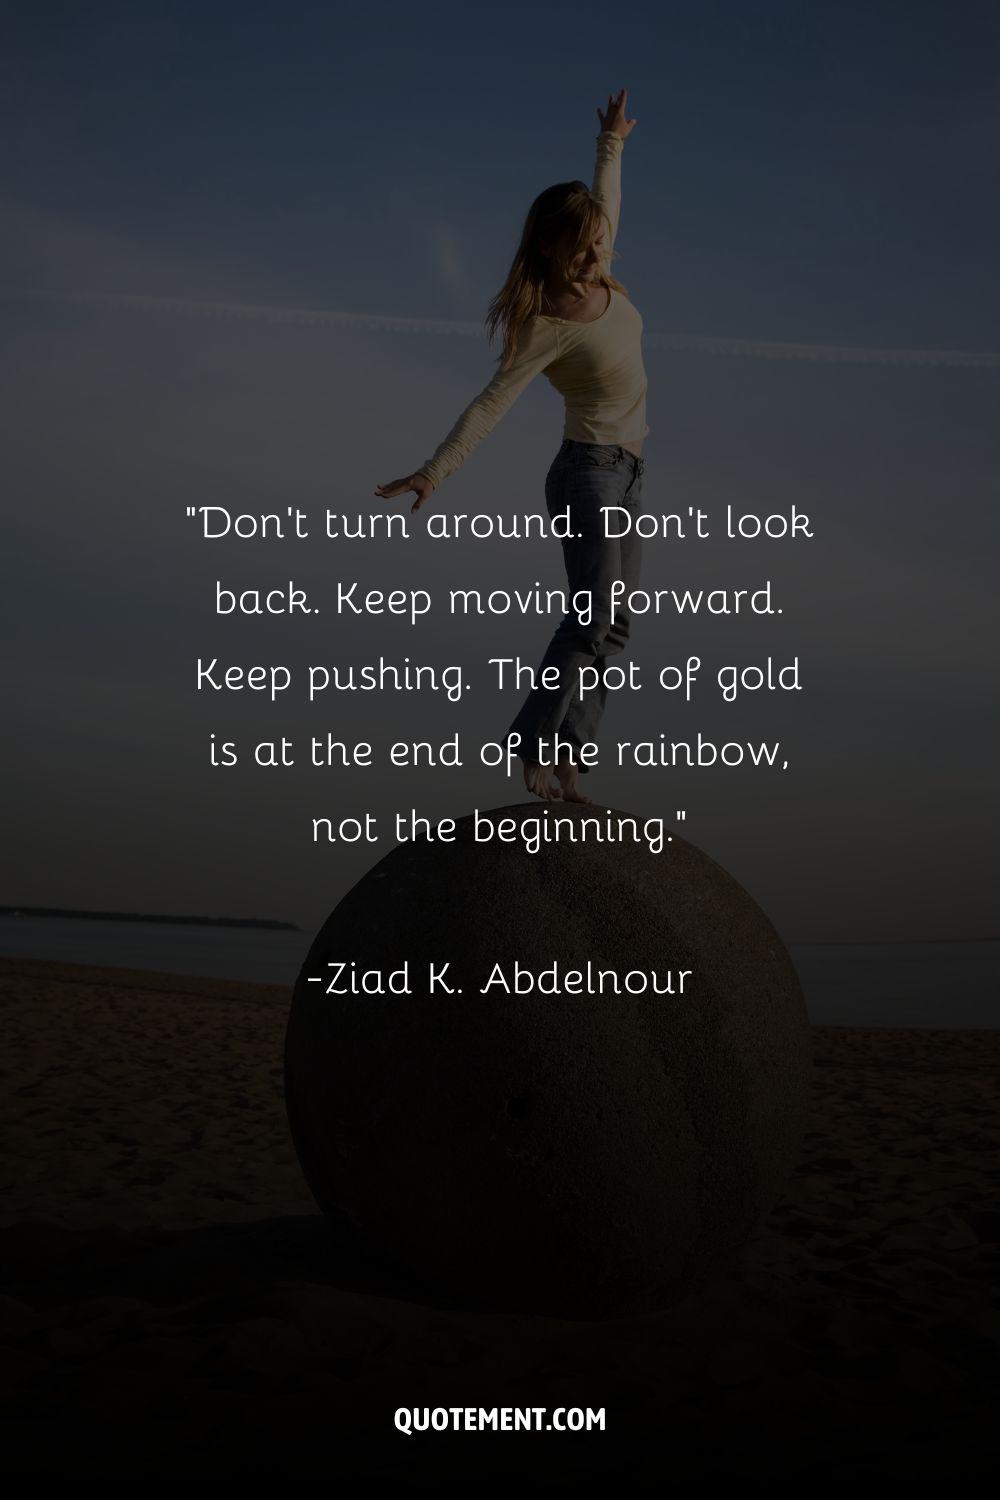 a woman on a big round stone with her arms spread representing keep moving forward quote